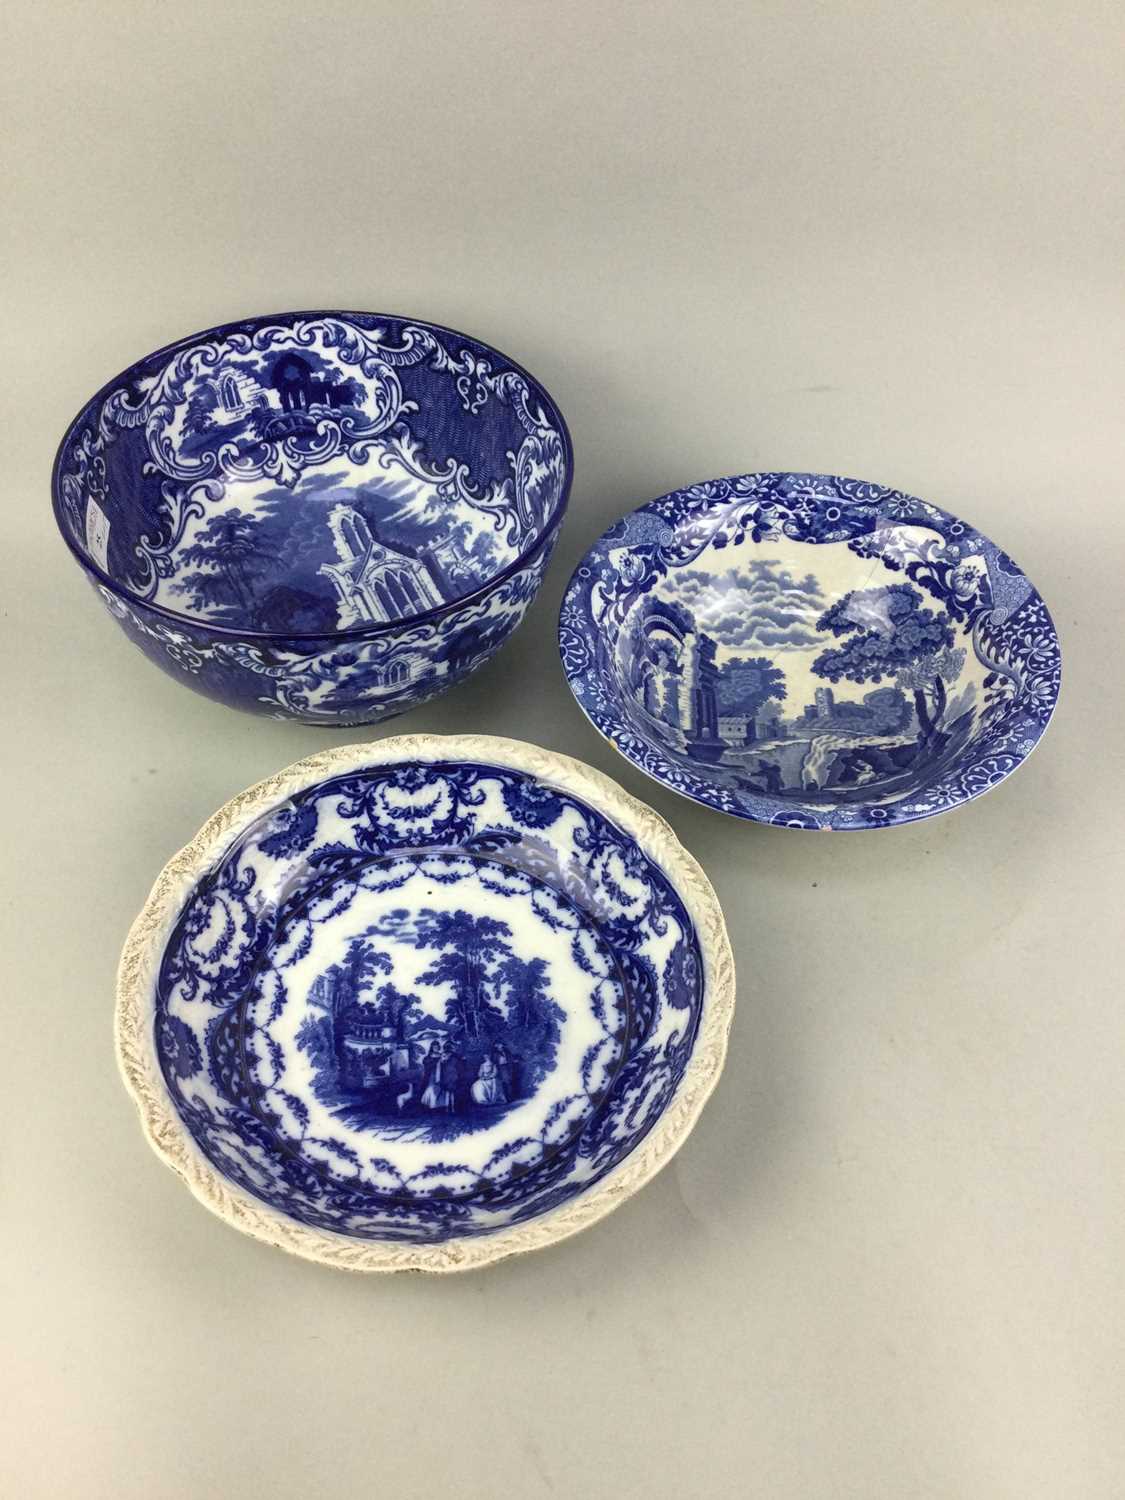 Lot 25 - AN EARLY 20TH CENTURY BLUE AND WHITE CIRCULAR BOWL AND OTHER BOWLS AND PLATES